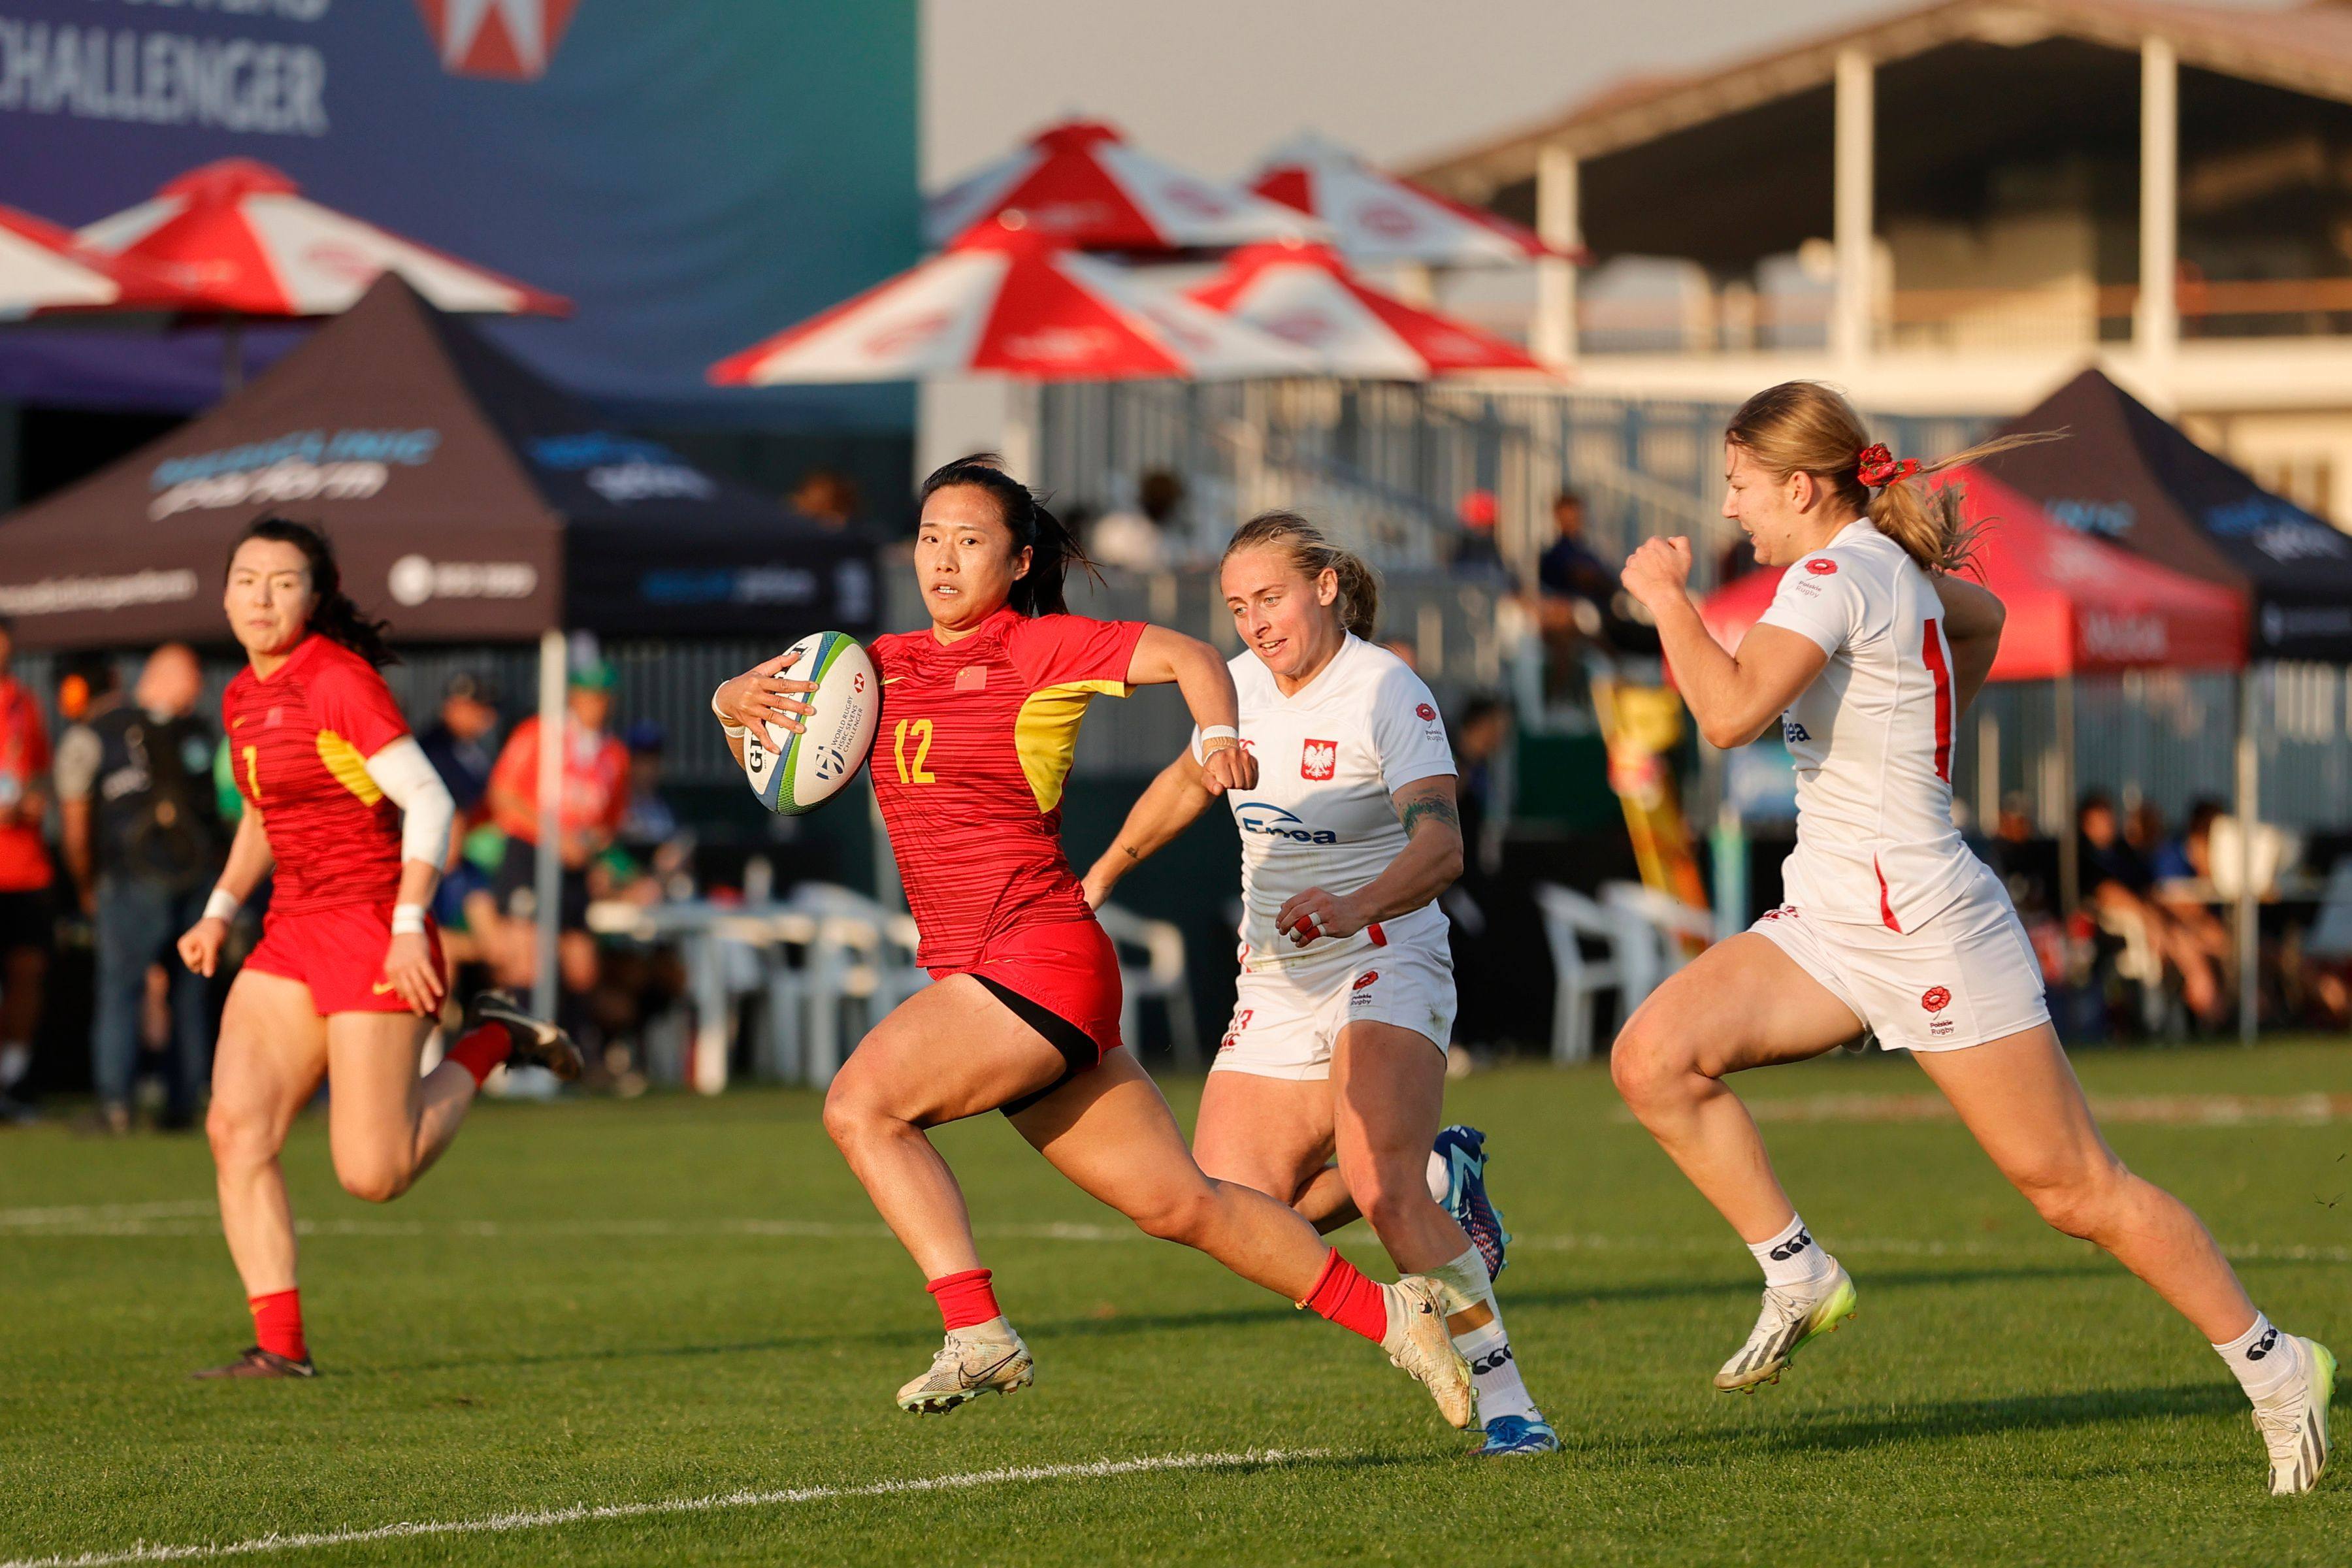 China’s YuHu cuts through the Poland defence during her side’s triumphant World Rugby Sevens Challenger Series tournament in Dubai. Photo: World Rugby